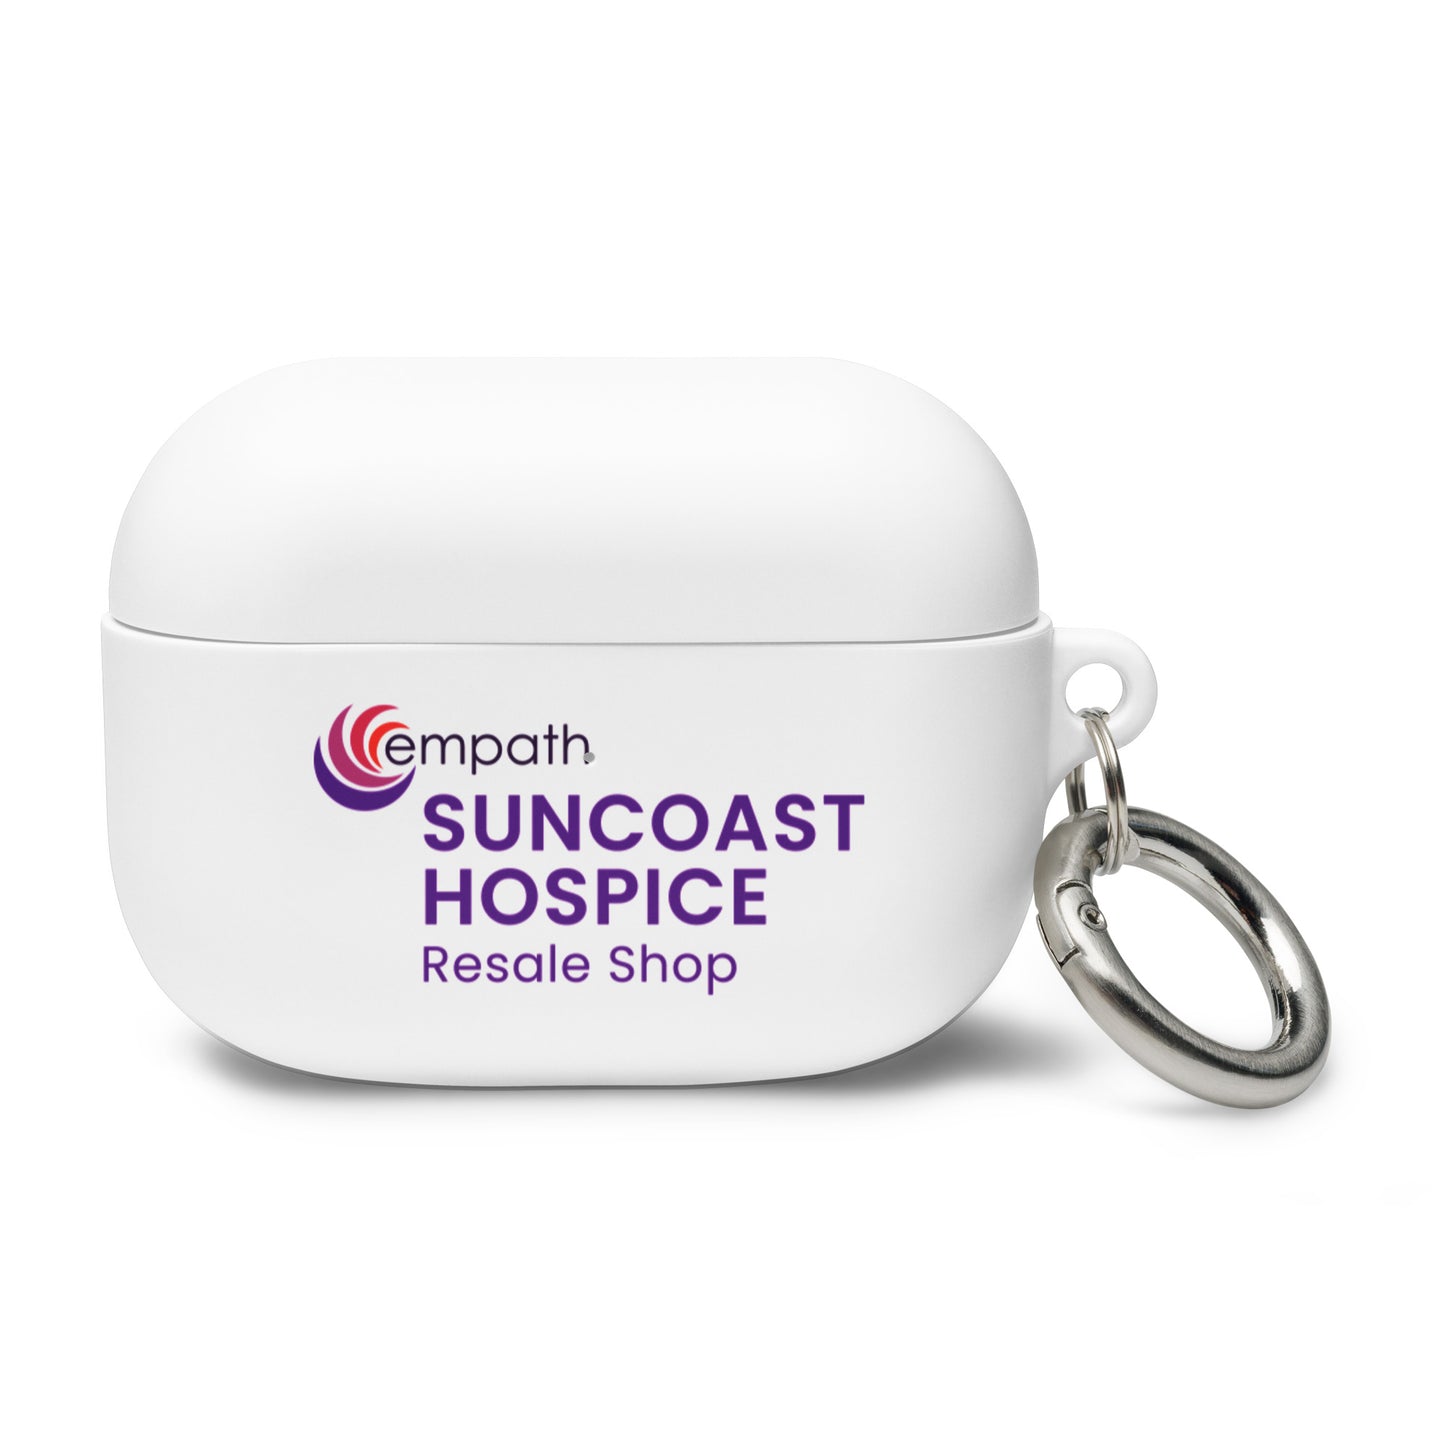 Rubber Case for AirPods® - Suncoast Hospice Resale Shop